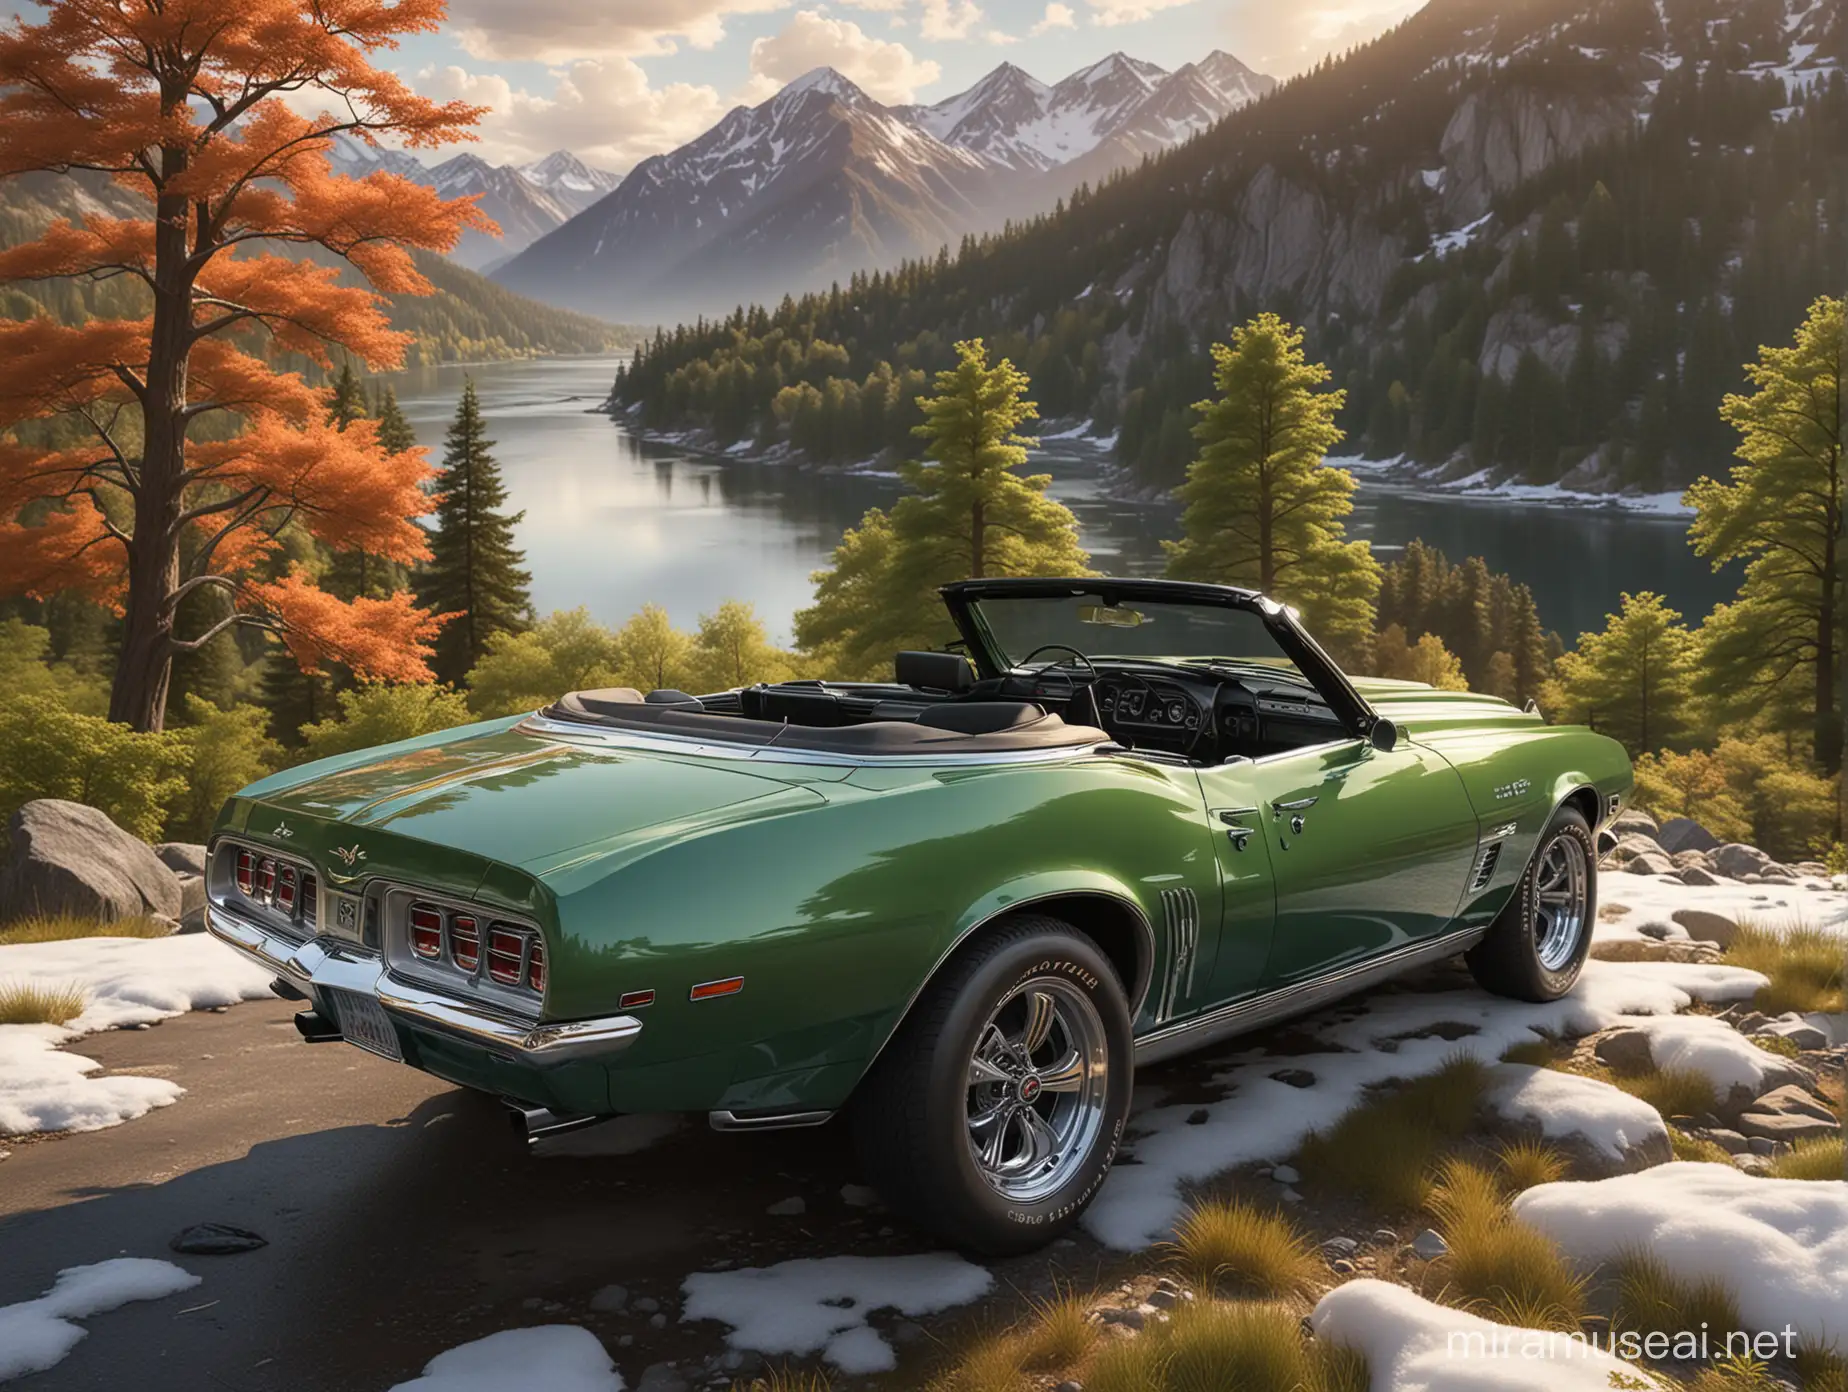 photo realistic of a verdoro green 1969 Firebird convertible with top down, with Pontiac front grill, hood scoops, wide silver chrome tires, sitting on a mountain top overlooking a lush green valley below with large flowing river. huge japanese maple trees with redish foliage follow the course of the river. snow topped mountains in background. sunset sky with fluffy clouds